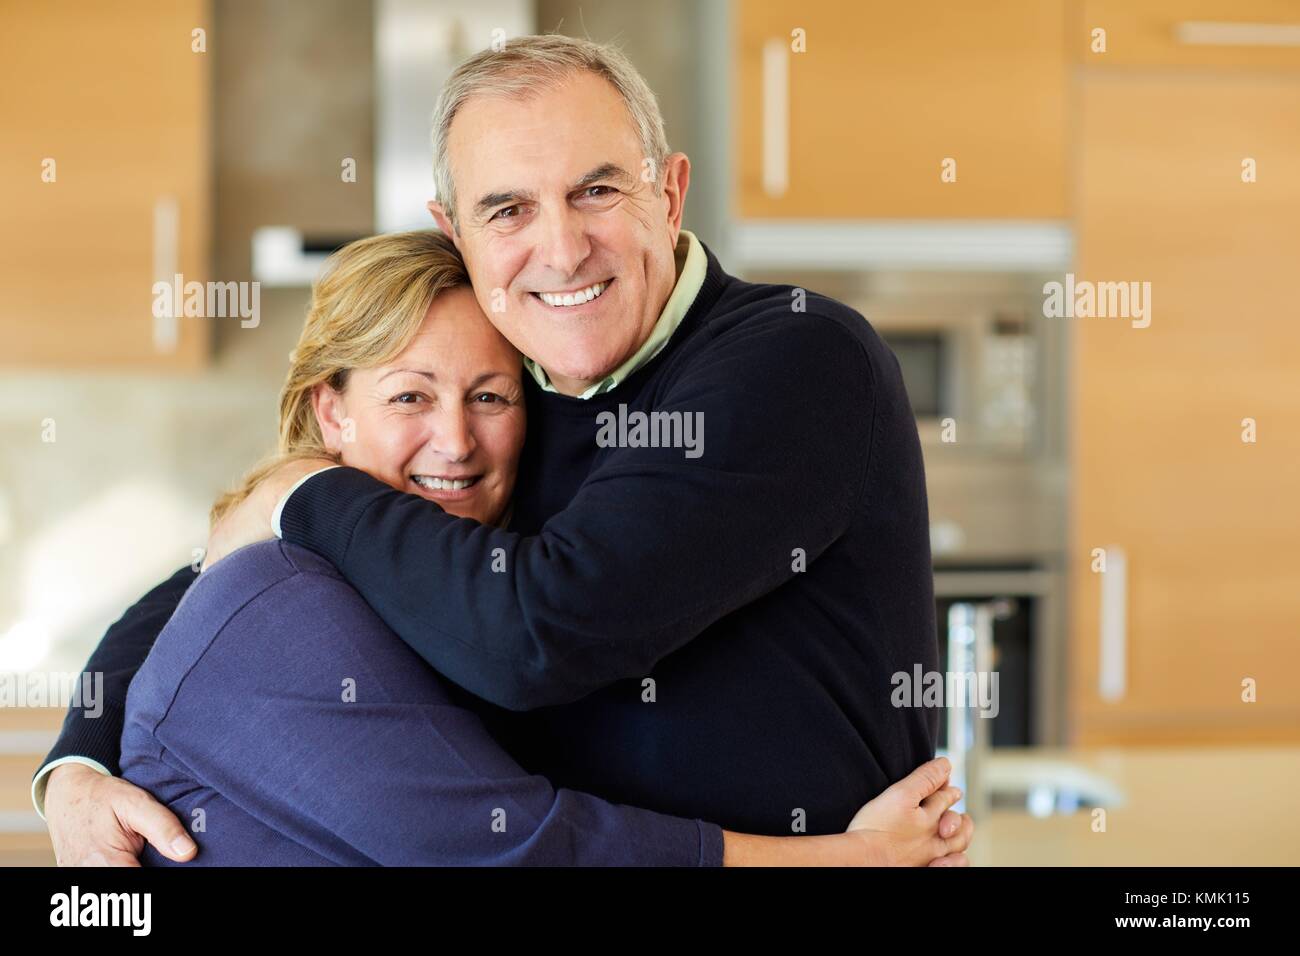 Adult couple in the kitchen Stock Photo